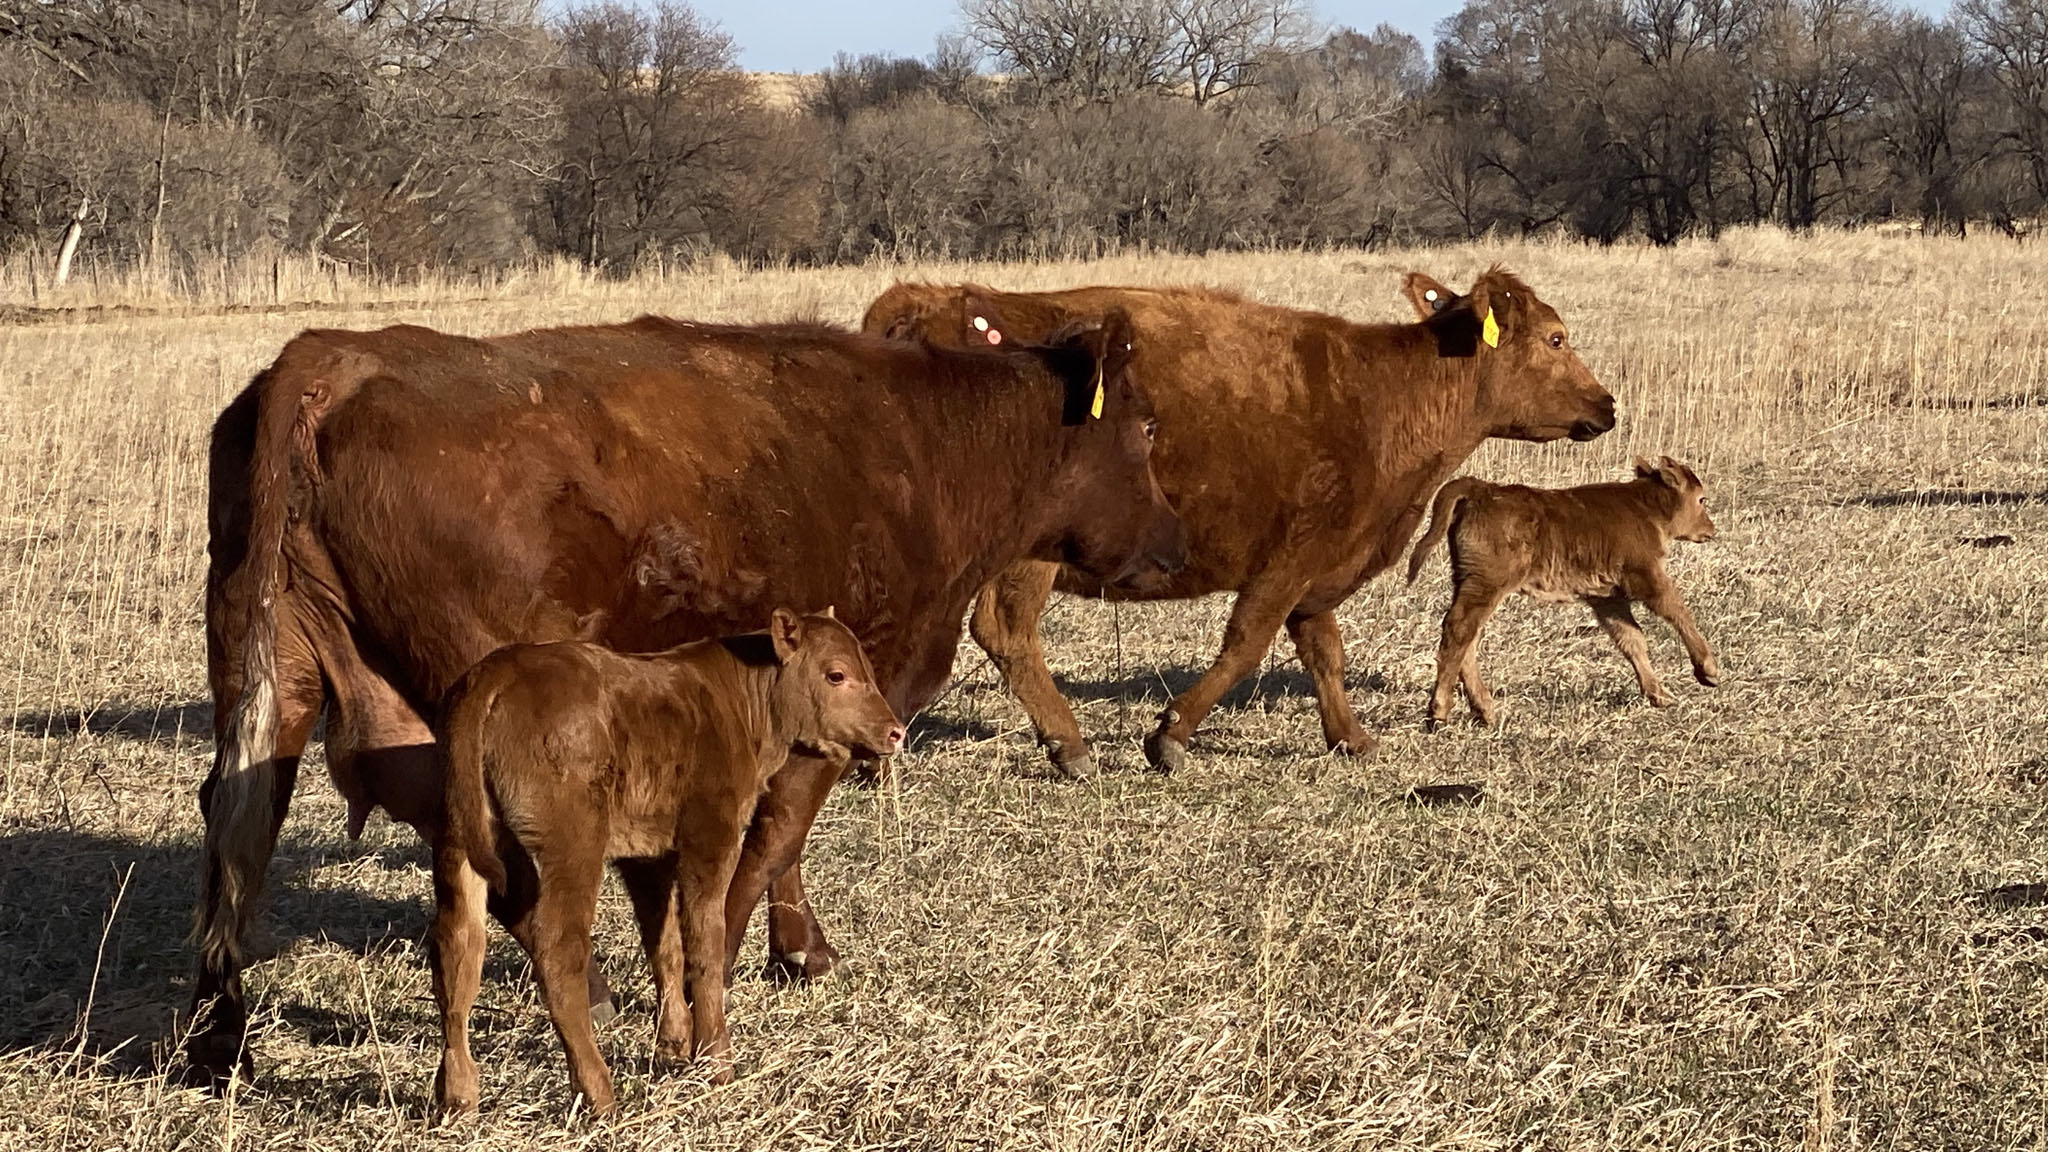 Cows at the Nebraska College of Technical Agriculture will begin calving in March. A public program on the beef packing industry is Feb. 15 at campus. (Annie Bassett photo / NCTA News)